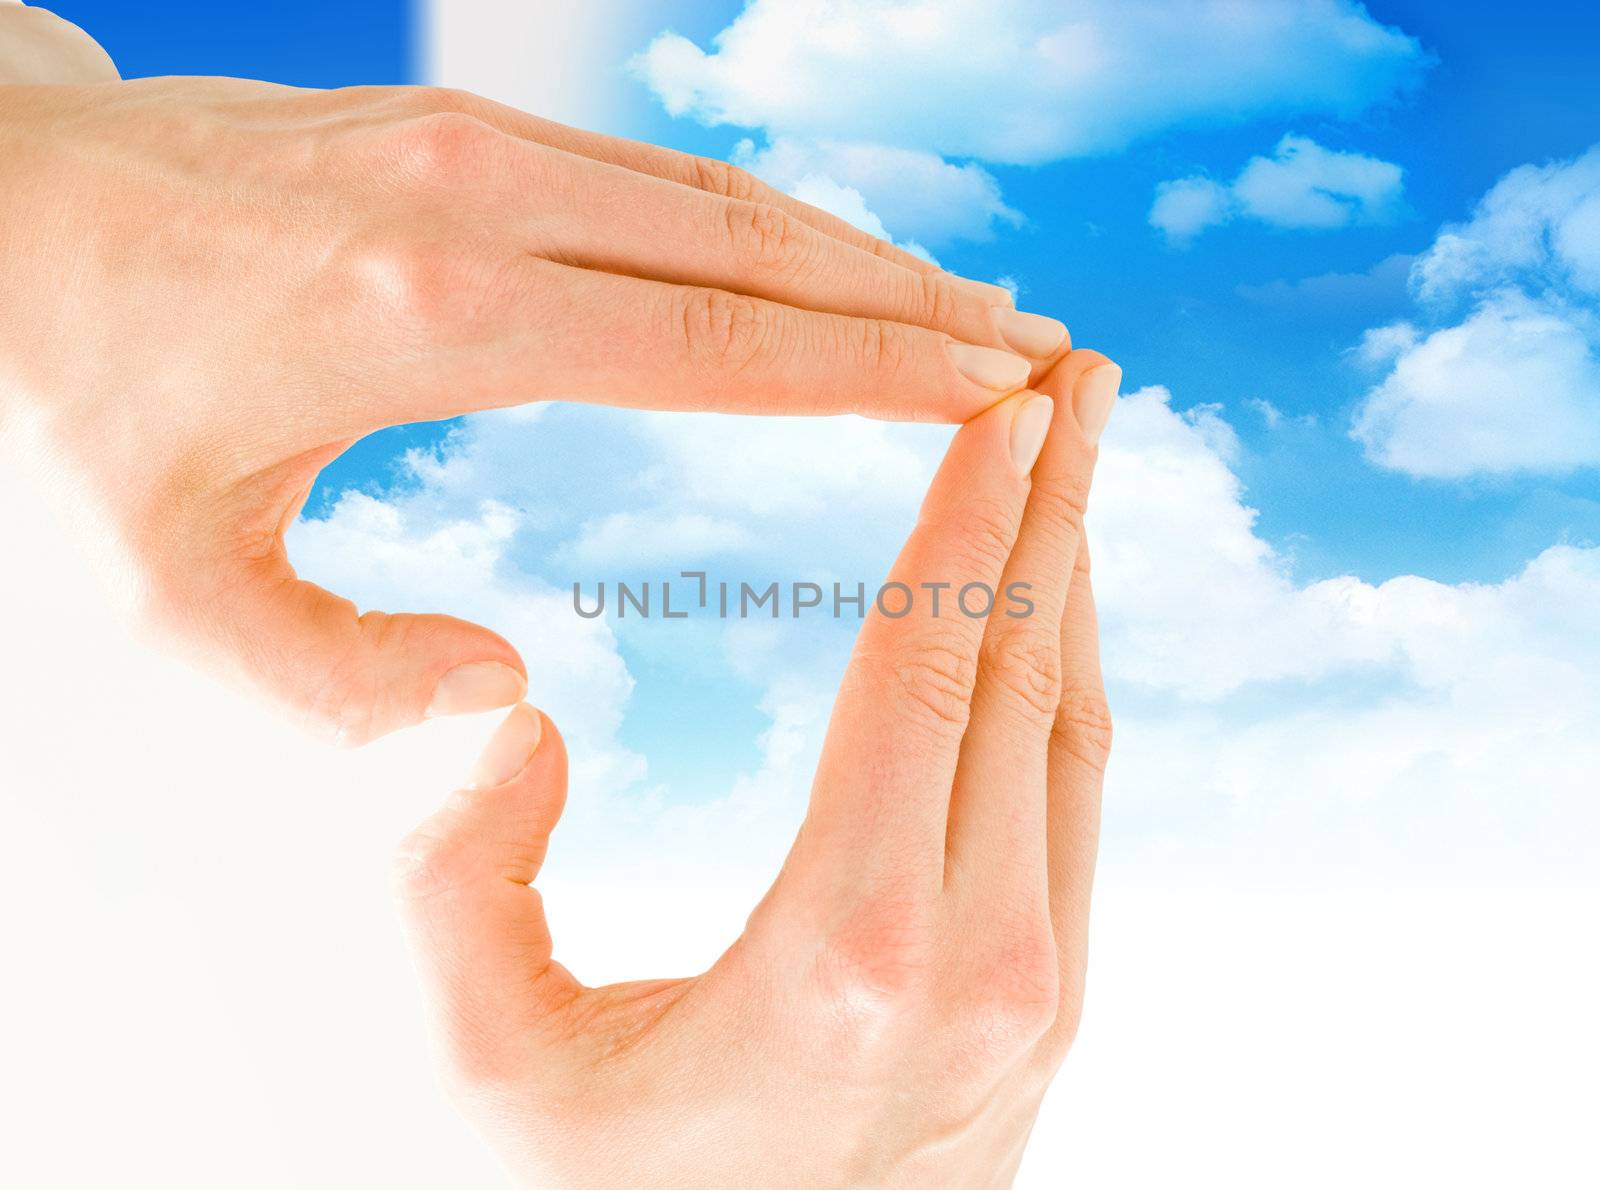 Nice background with hands like a heart and blue sky
